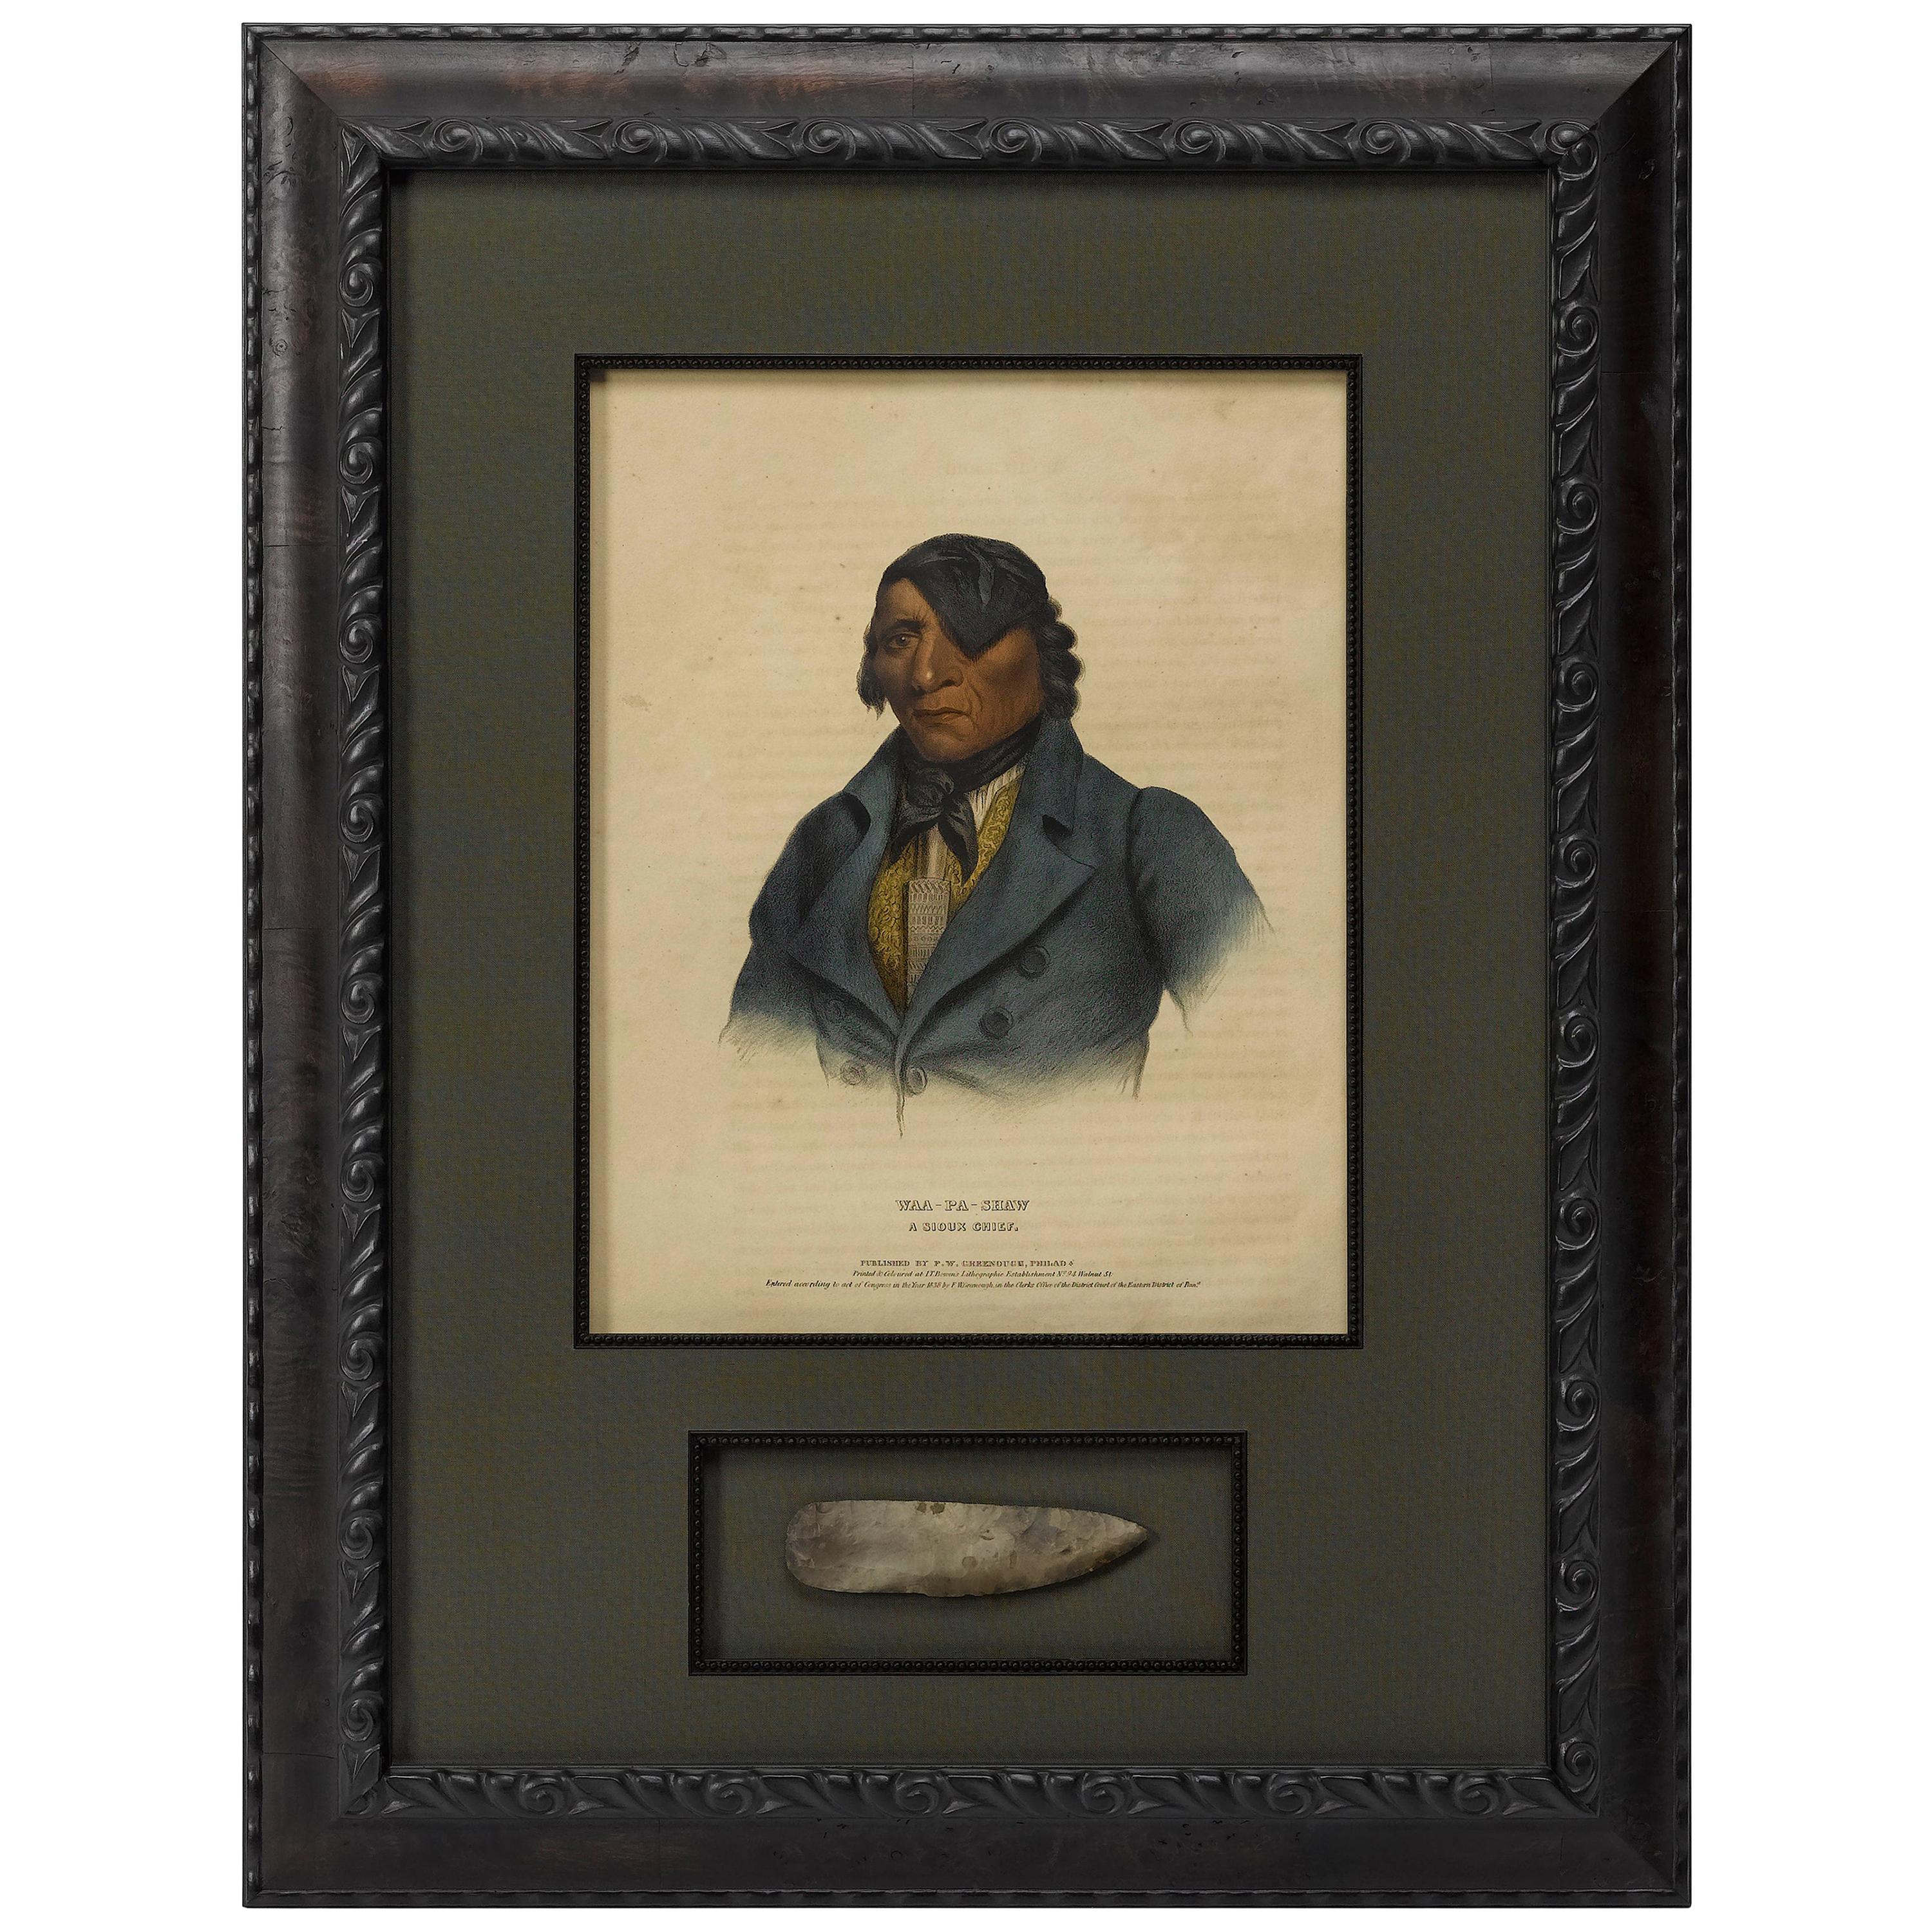 1838 Waa-Pa-Shaw A Sioux Chief Hand-Colored Lithograph and Antique ...